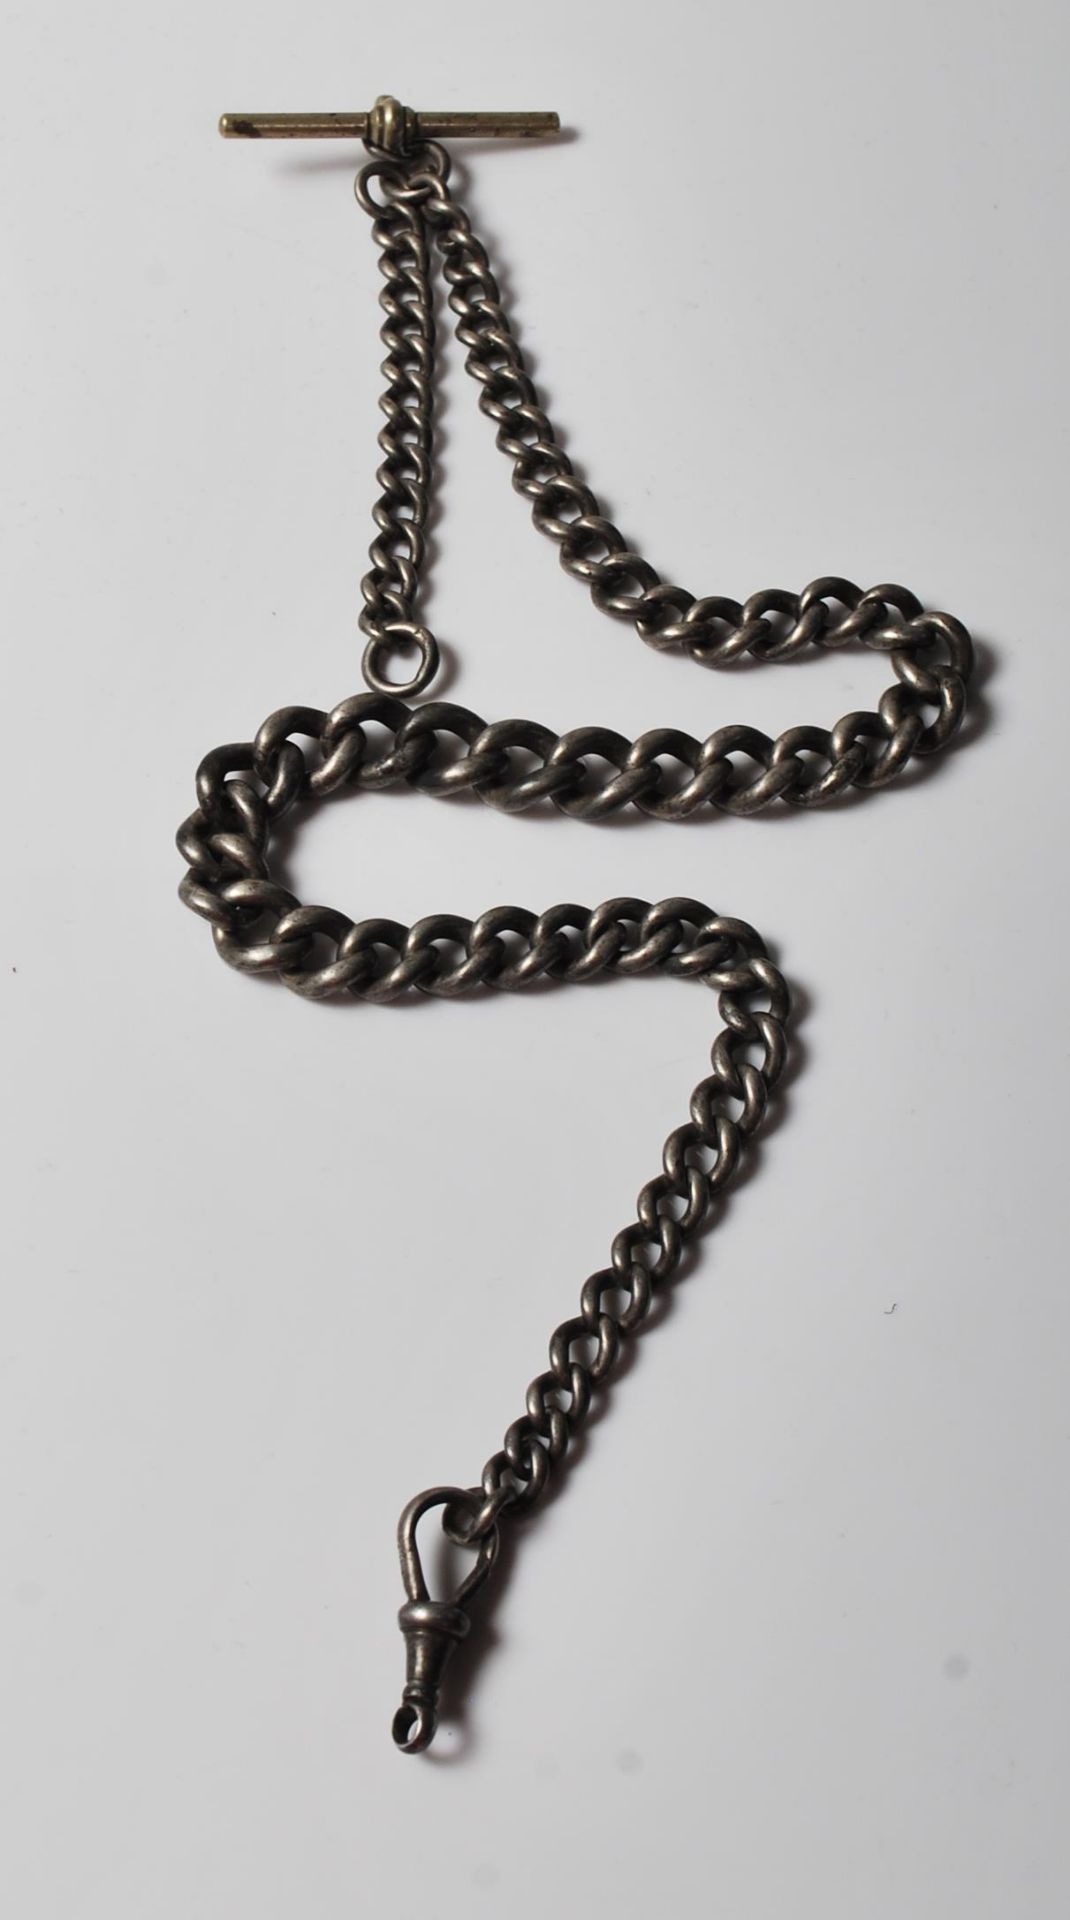 EARLY 20TH CENTURY SILVER POCKET WATCH CHAIN